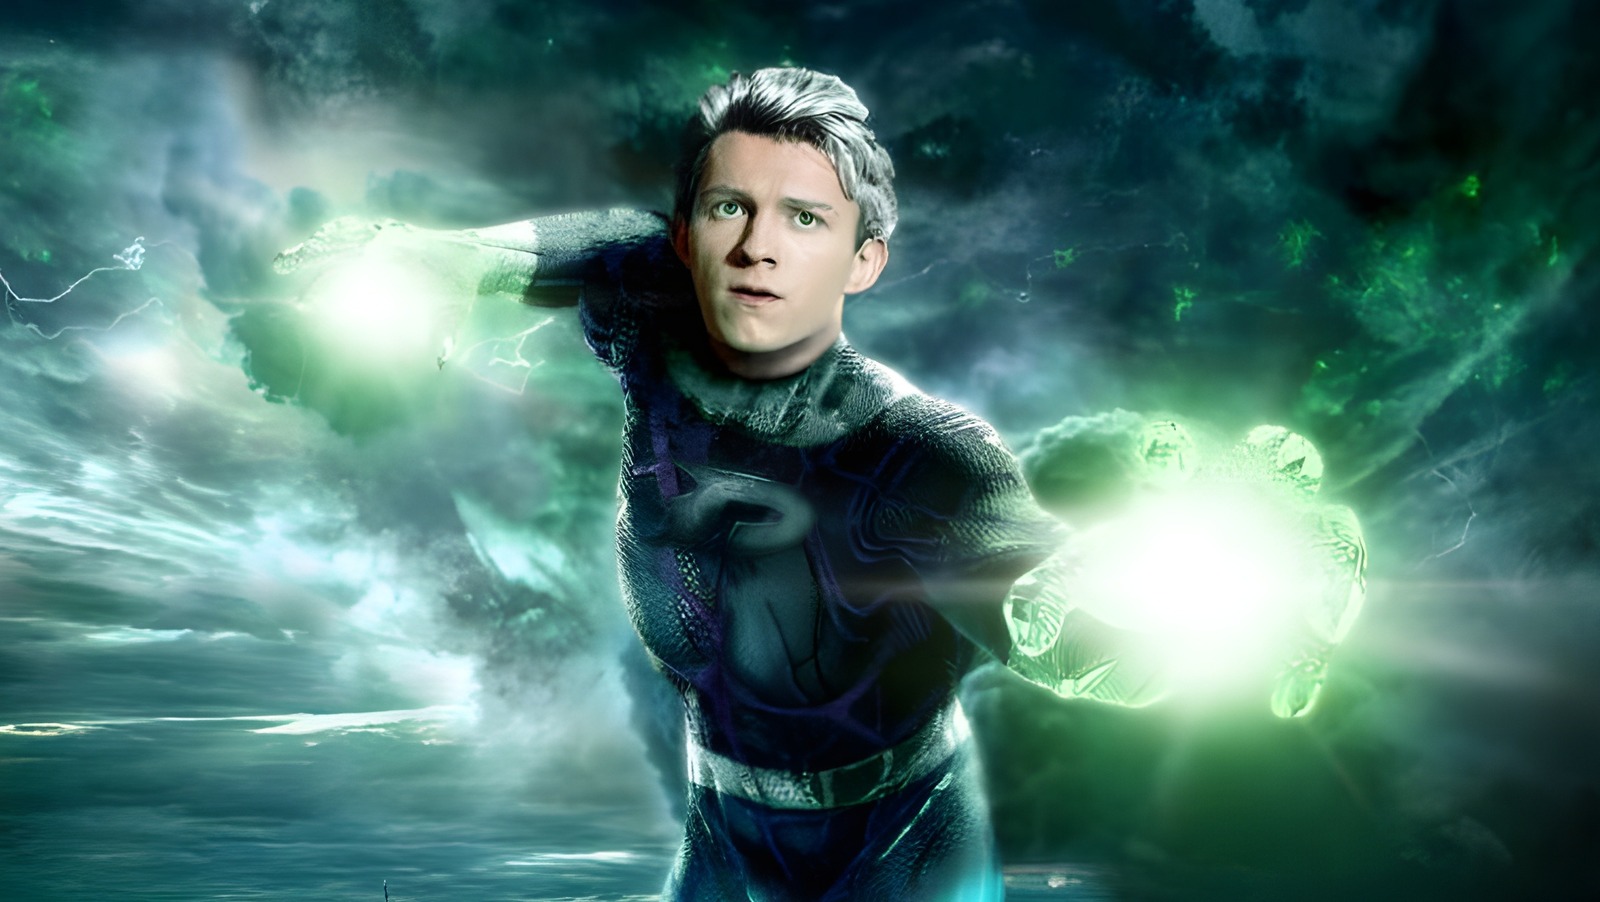 All Grown Up Danny Phantom Porn - Tom Holland As Danny Phantom Is Perfect Casting - And This Fanart Proves It